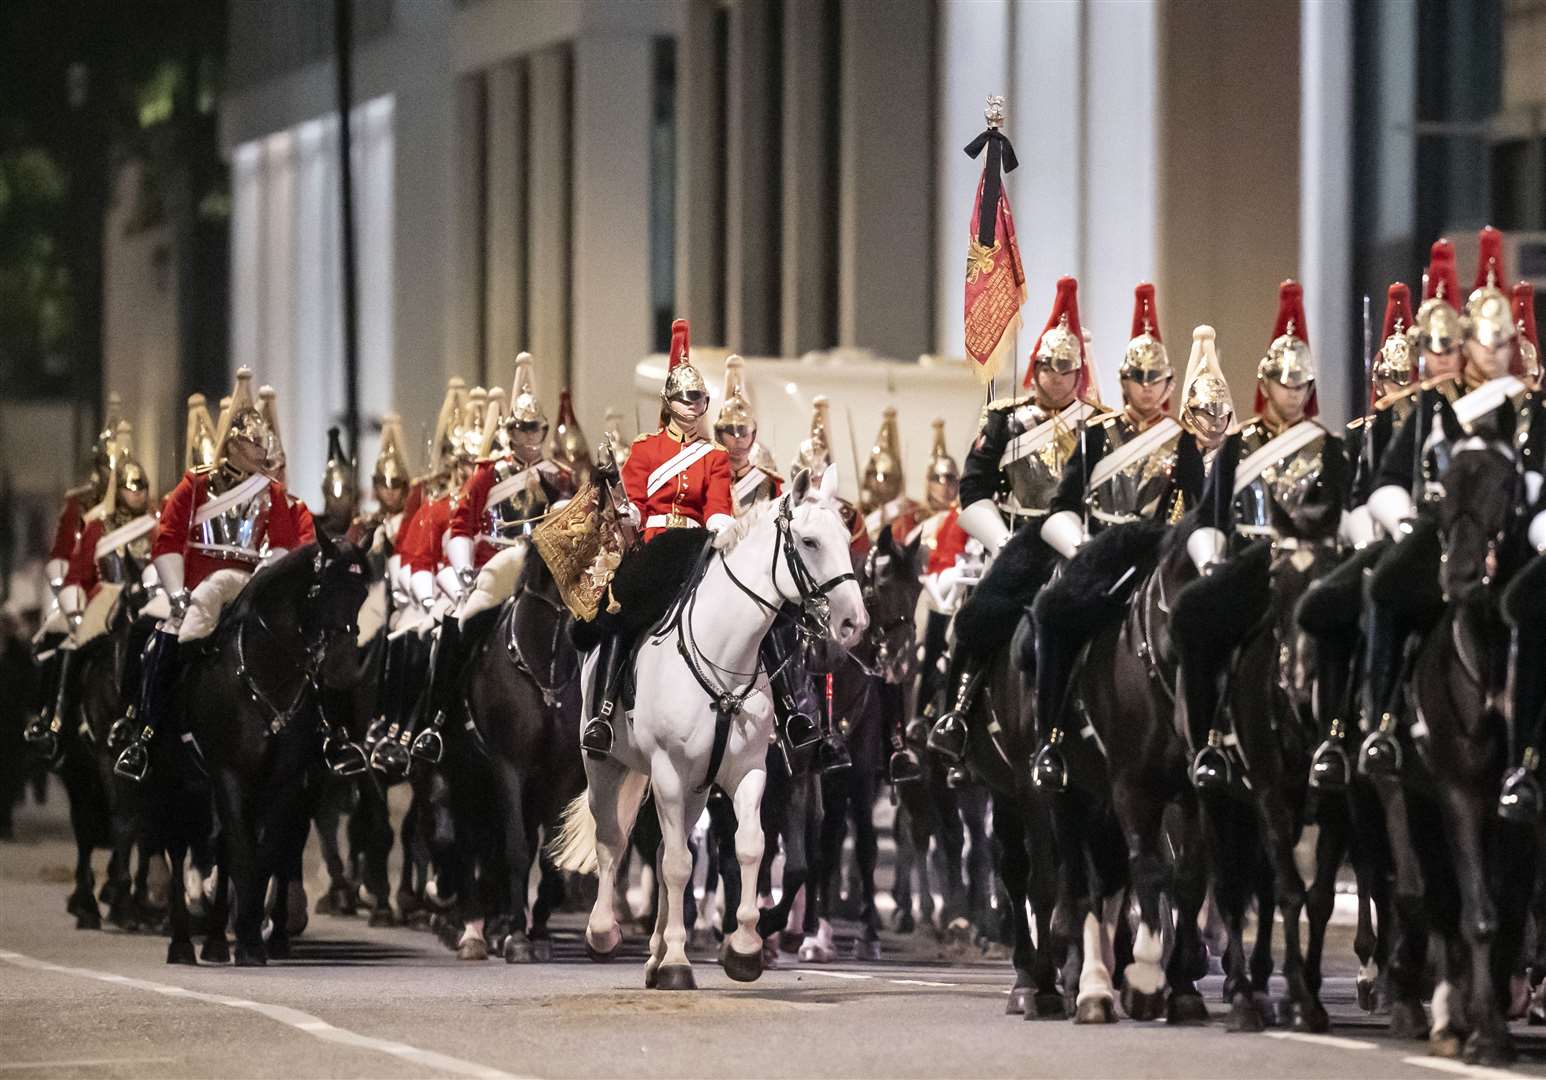 Several members of the Household Cavalry on horseback took part in the rehearsals (Danny Lawson/PA)